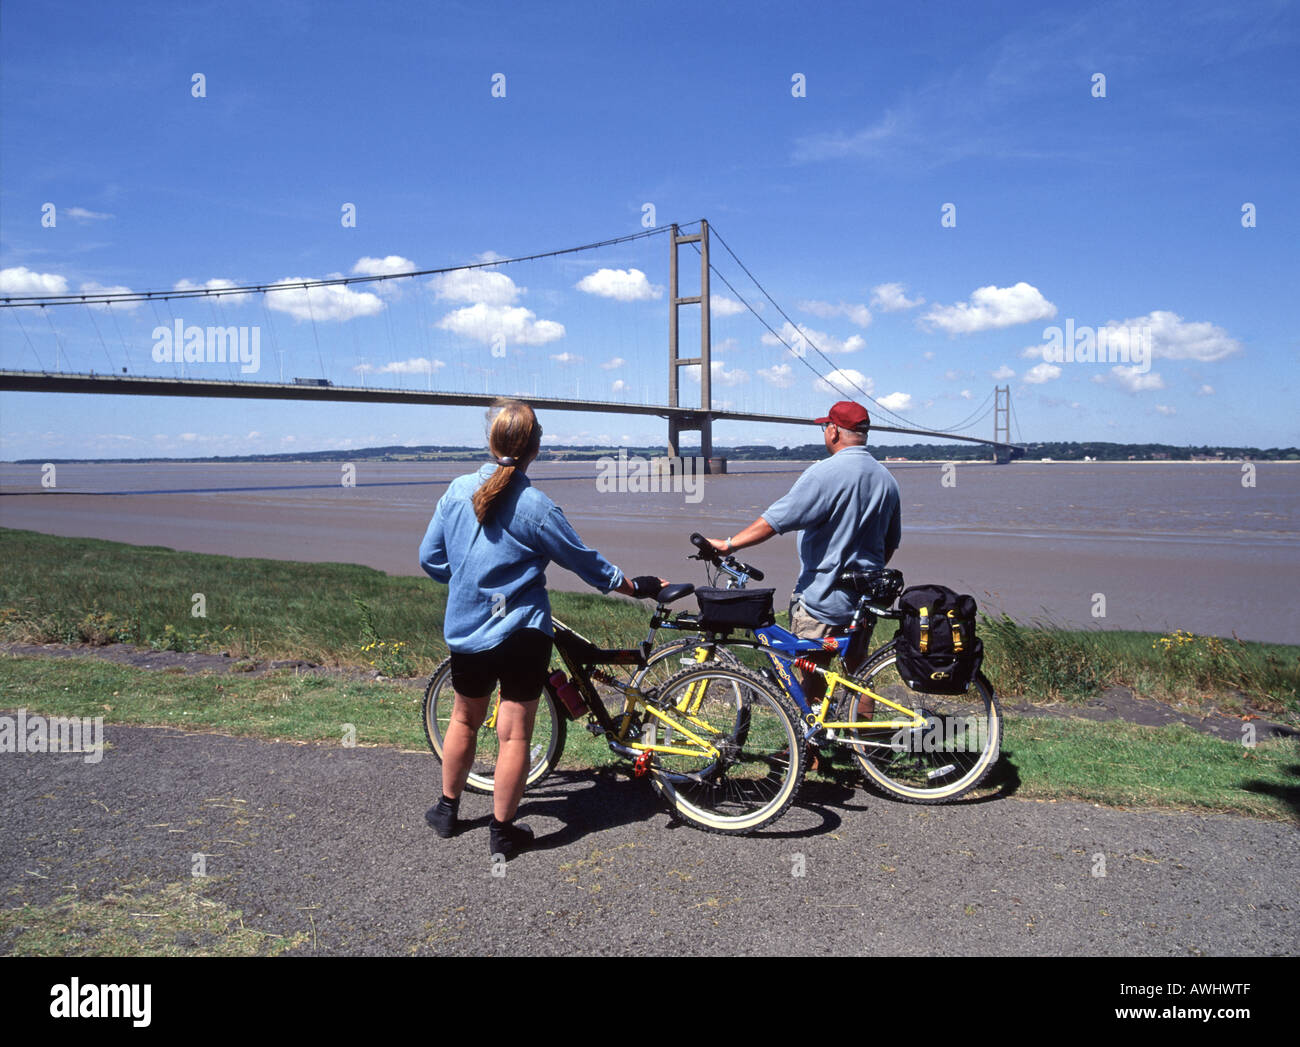 Cycling beside Landmark A15 road Humber suspension bridge spans humber estuary from Barton upon Humber Lincolnshire towards East Riding of Yorkshire Stock Photo